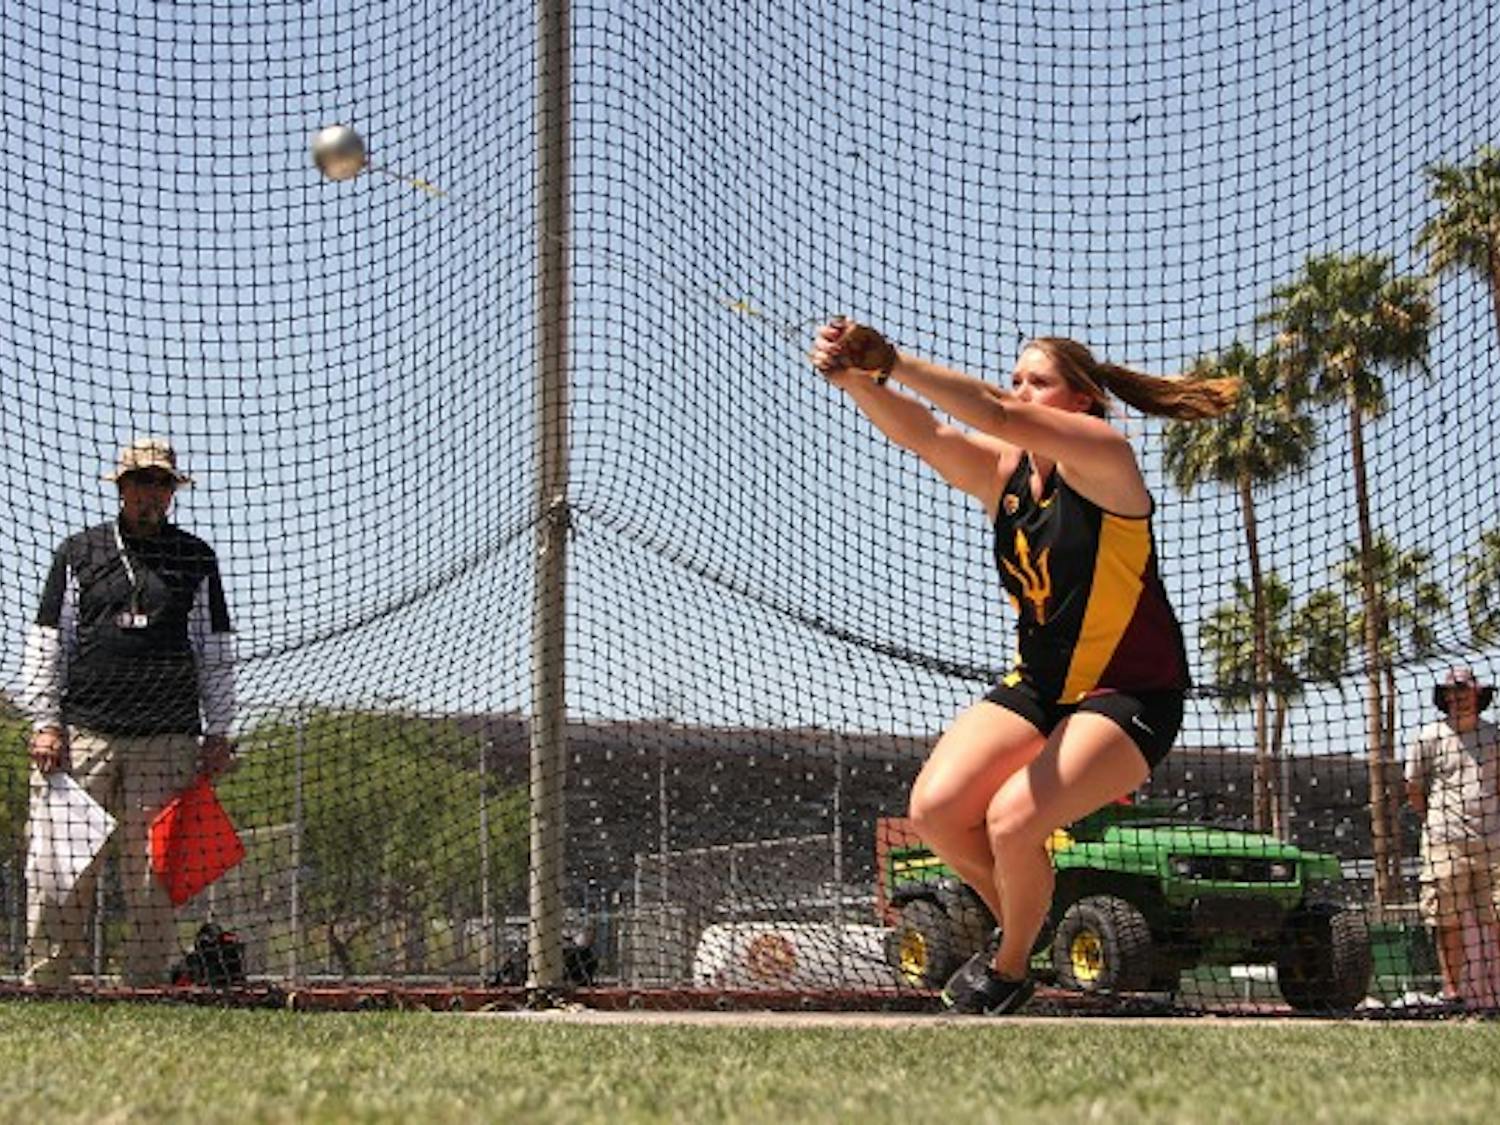 Redshirt junior Chelsea Cassulo rotates her body one more time before letting go in the hammer throw competition in the Sun Angel Classic on April 5. Cassulo earned her eighth win in the last nine meets this weekend. (Photo by Abhiram Chandrashekar)